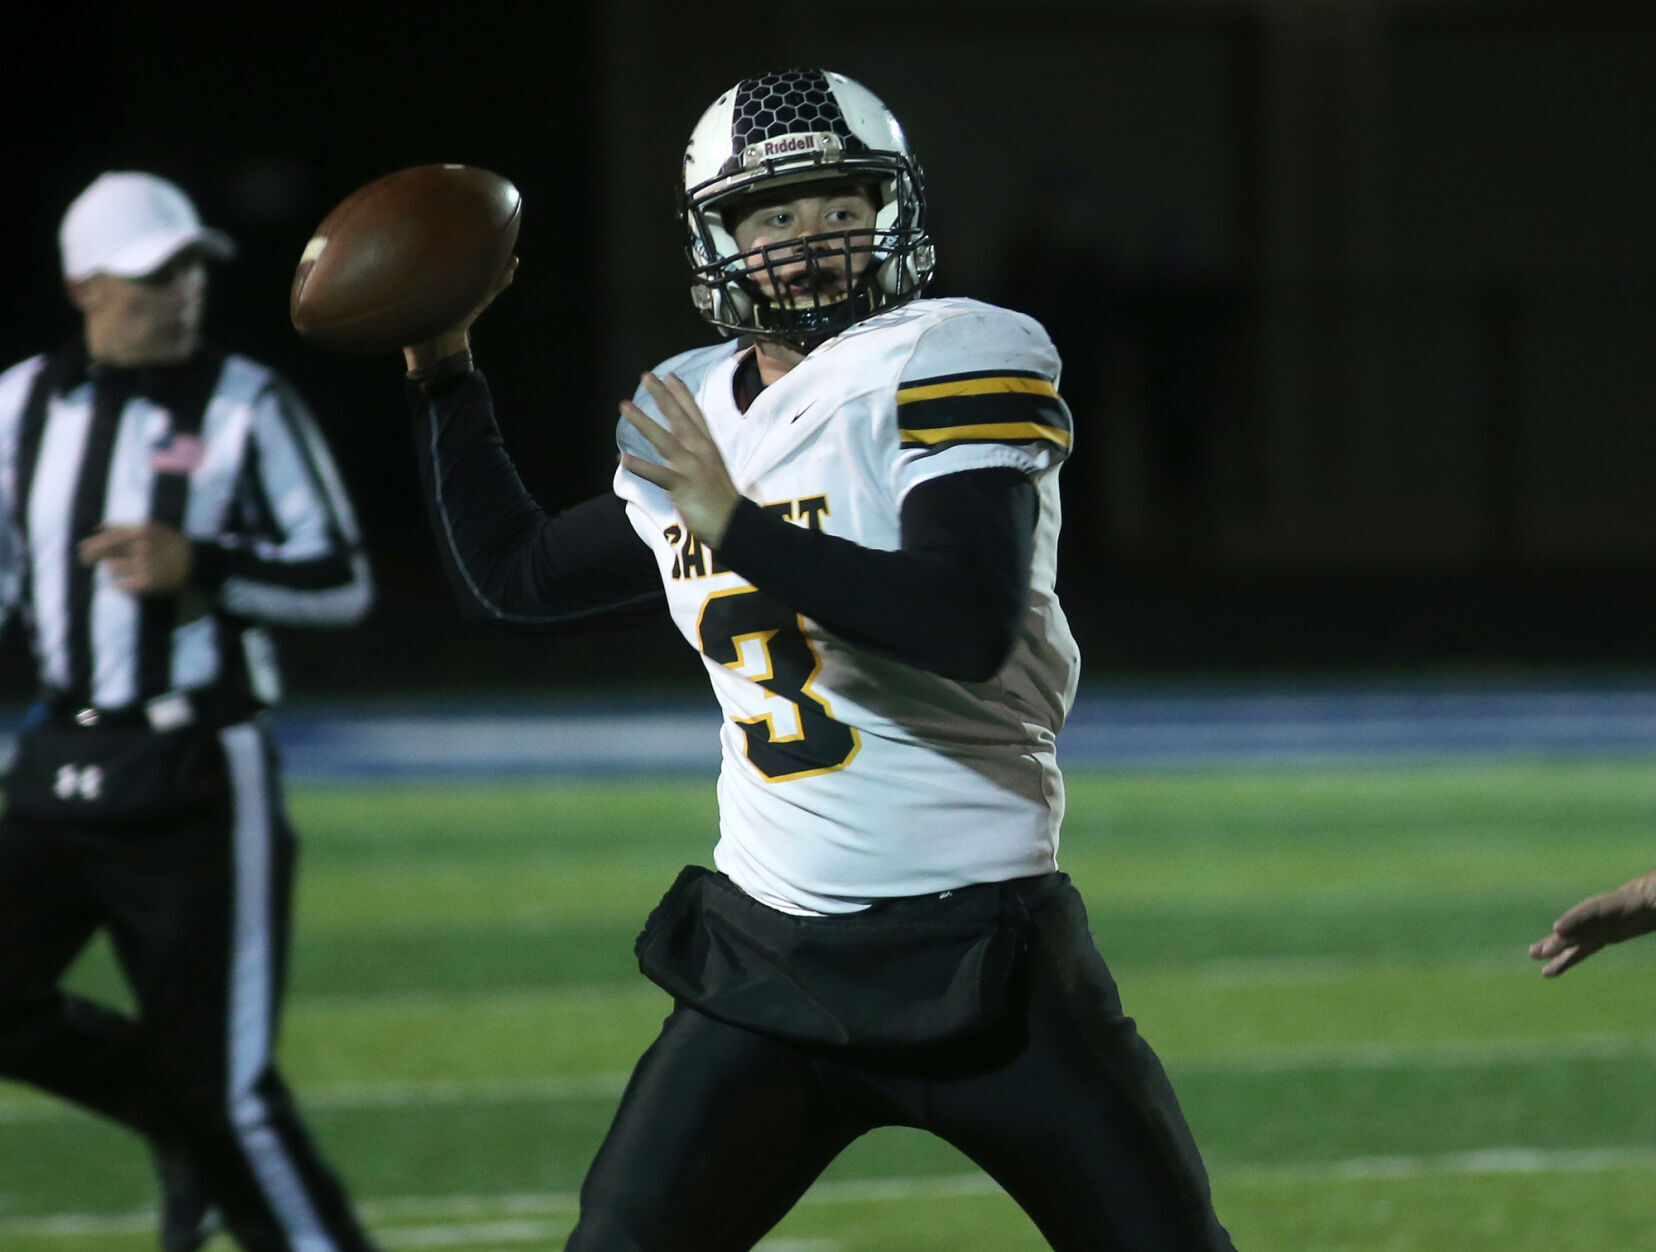 Latest Scores and Standings in Wisconsin High School Football